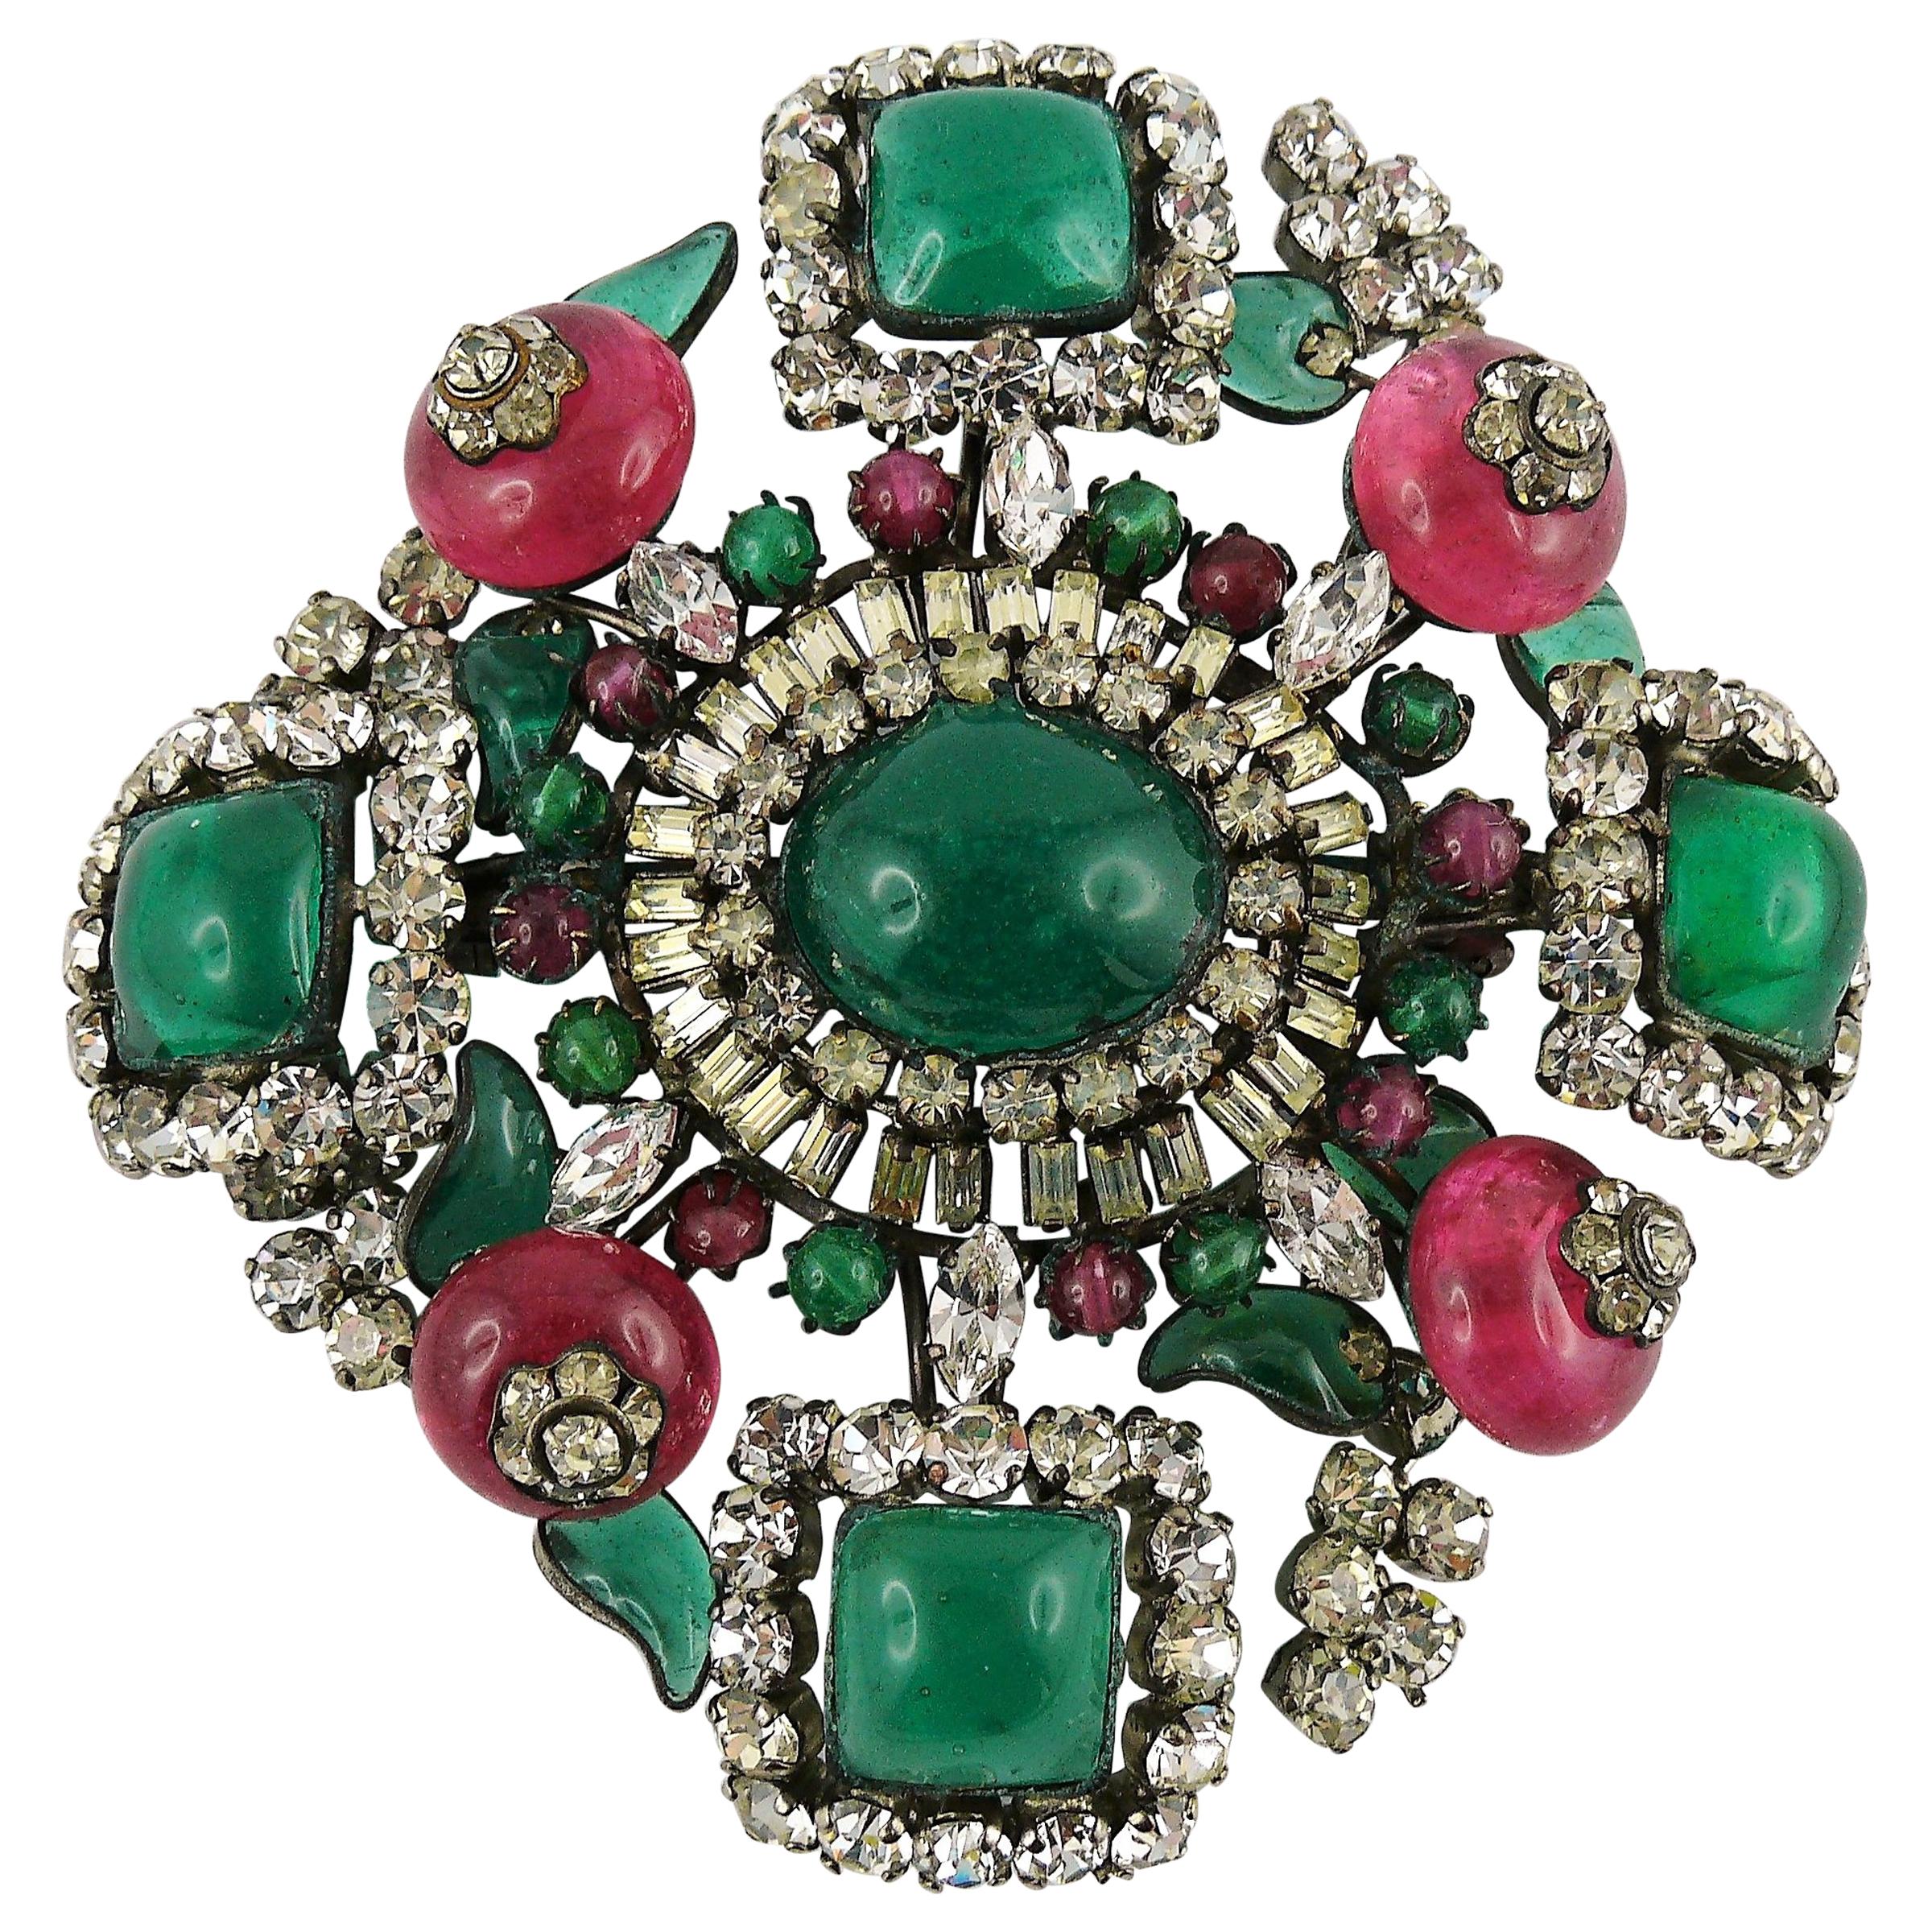 Magnificent Vintage Poured Glass Jewelled Massive Brooch Pendant 